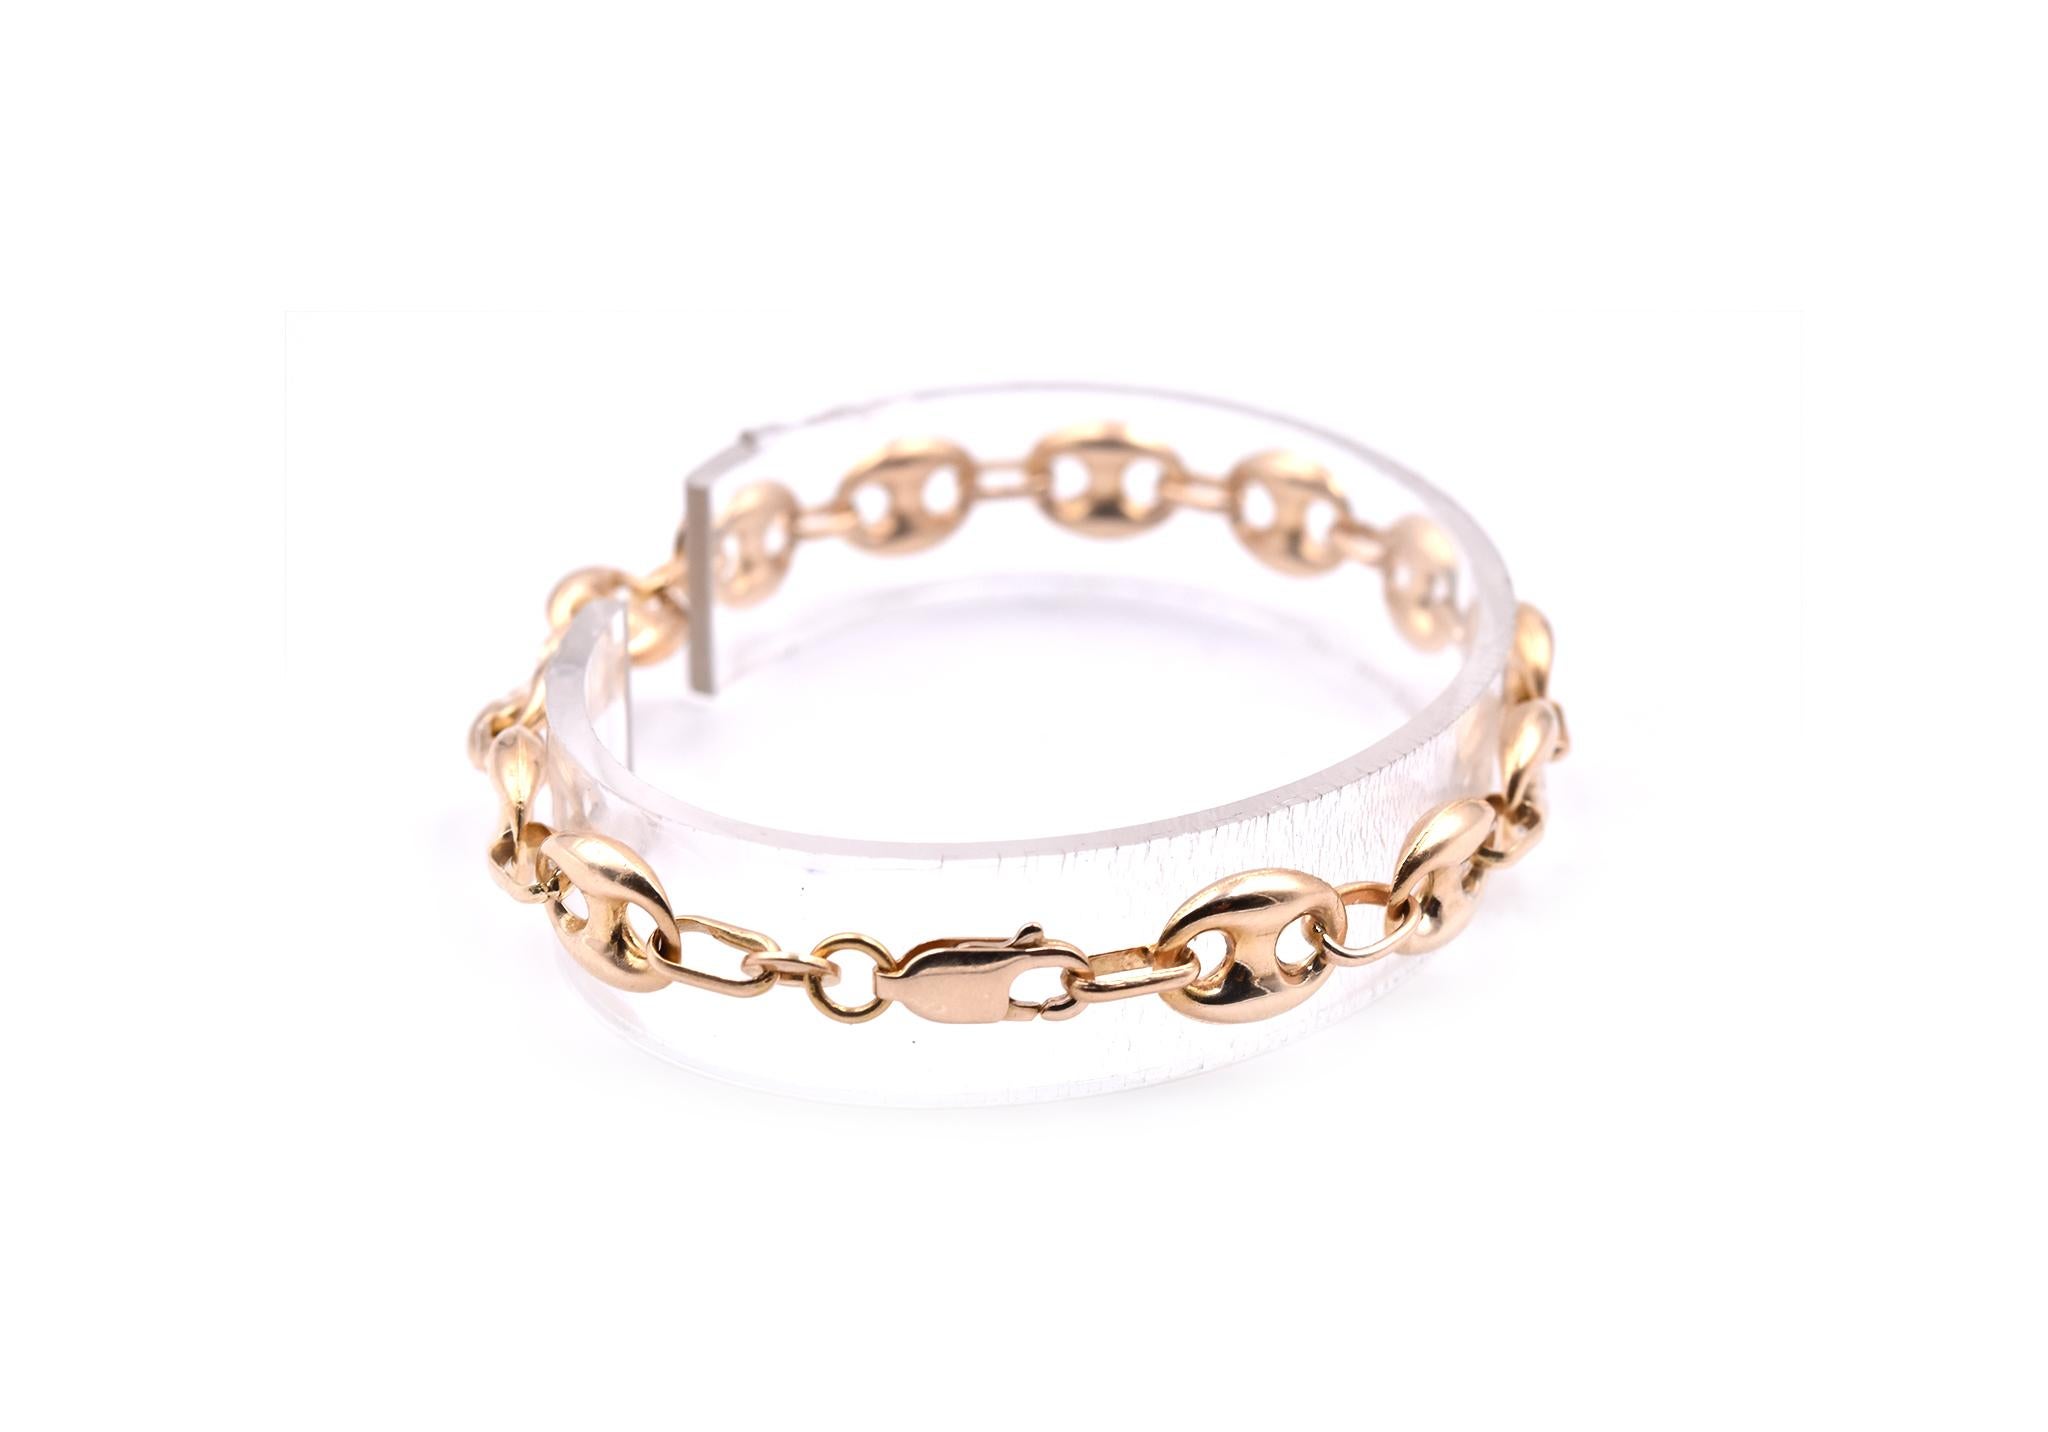 Designer: custom
Material: 14k yellow gold
Dimensions: bracelet will fit 7 ½ -inch wrist and it is 7.84mm wide
Weight: 8.32 grams
